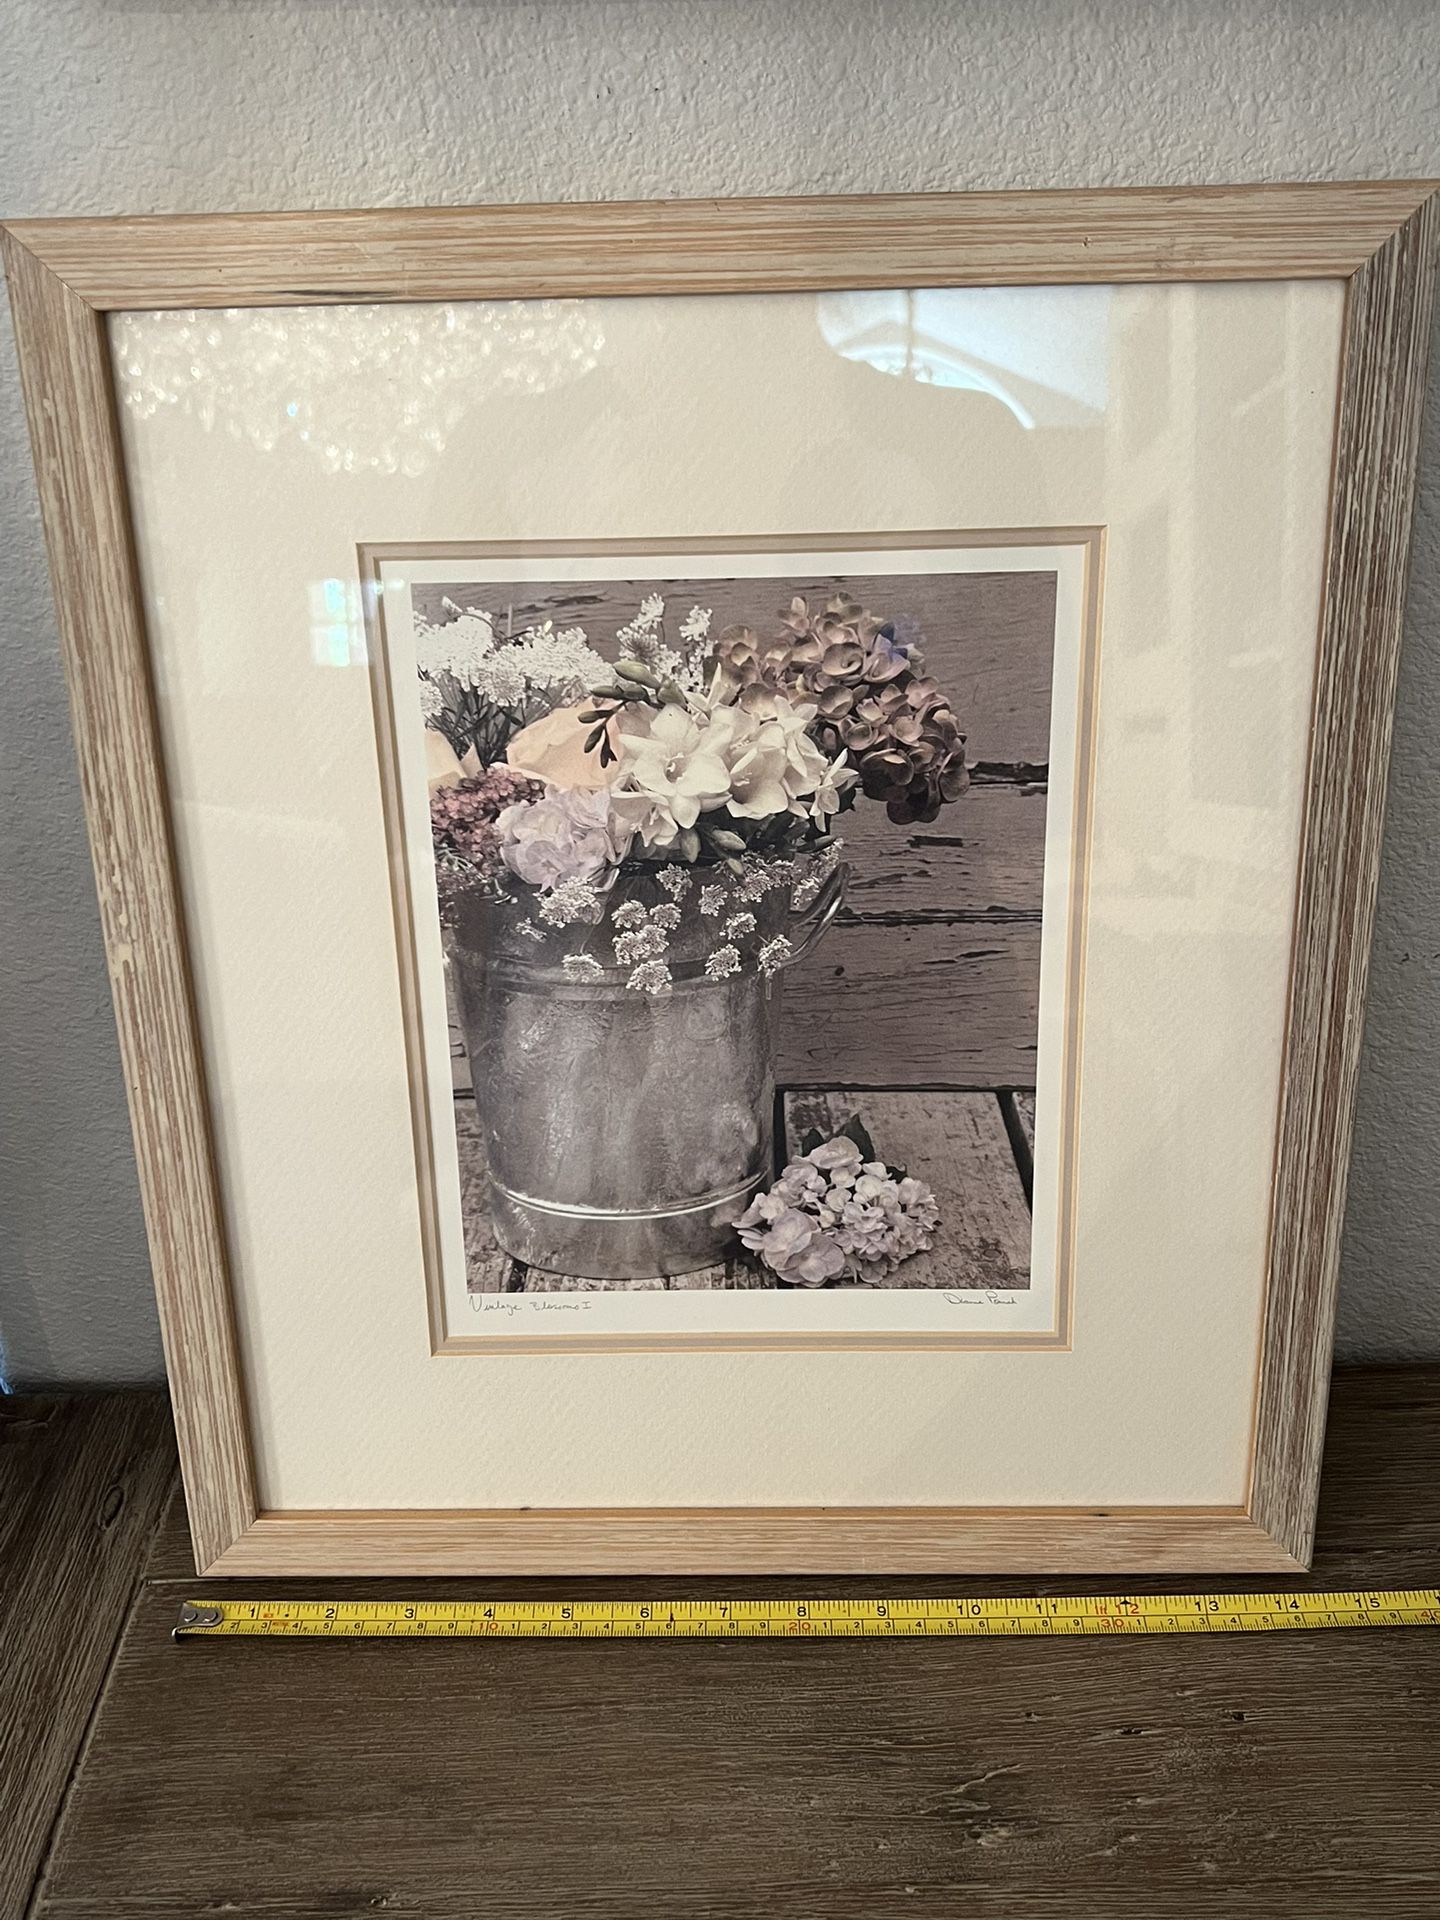 Approx 14.5x16.5 French Country Bucket Bouquet Framed Print Retail $25